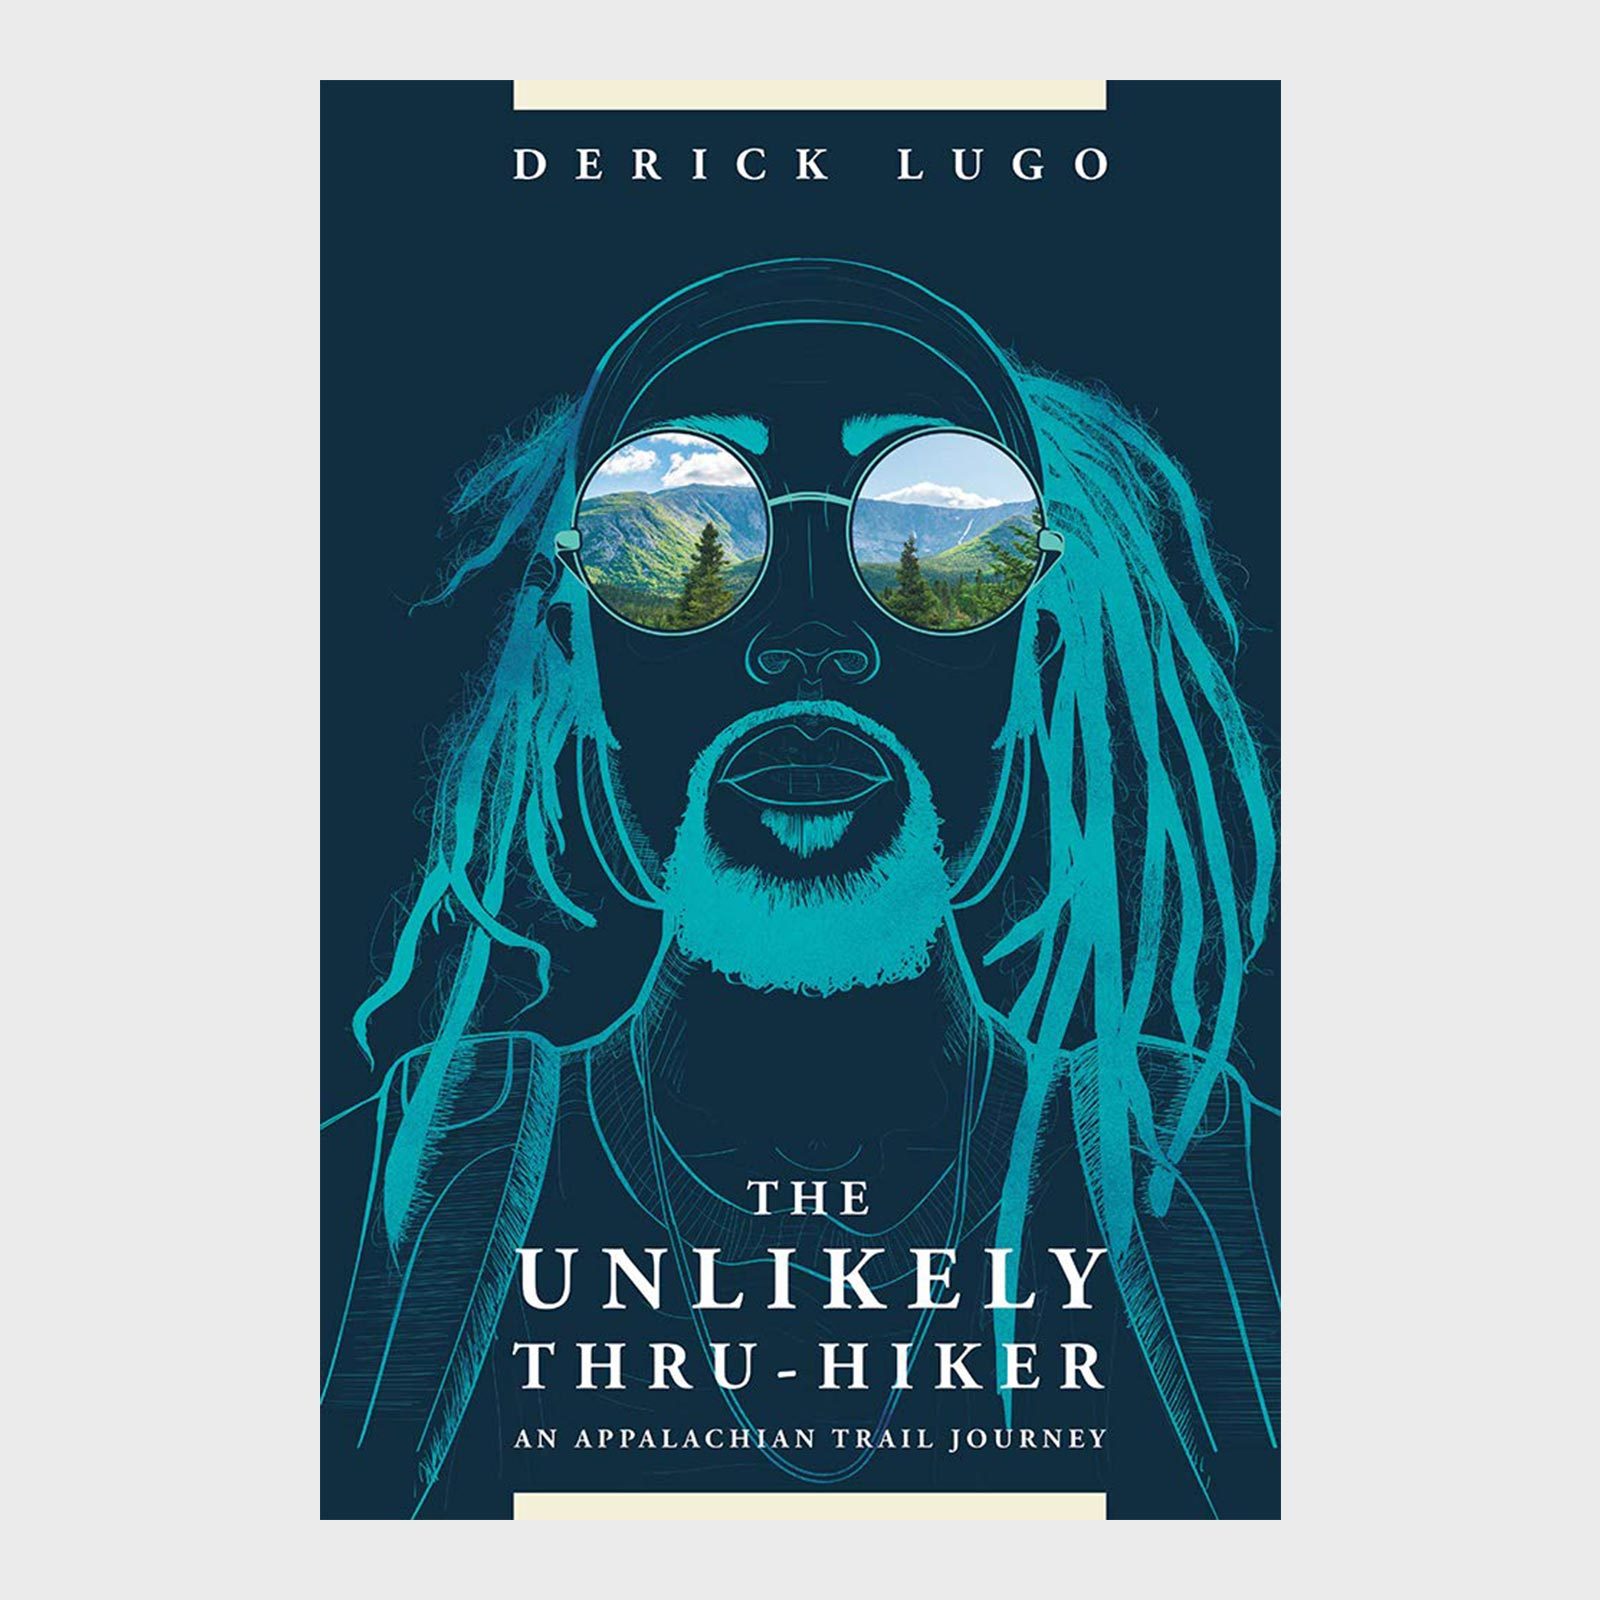 <h3><em>The Unlikely Thru-Hiker </em>by Derick Lugo</h3> <p><strong>Setting: </strong>The Appalachian Trail (from Georgia to Maine)</p> <p>It doesn't require a passport or a plane ticket, but the Appalachian Trail is a big change of scenery. It's also not for the faint of heart. In Derick Lugo's 2019 debut <a href="https://www.rd.com/list/memoirs-everyone-should-read/" rel="noopener noreferrer">memoir</a>, <a href="https://www.amazon.com/Unlikely-Thru-Hiker-Appalachian-Trail-Journey/dp/1628421185" rel="noopener noreferrer"><em>The Unlikely Thru-Hiker</em></a>, he describes his long walk in the woods in vivid detail—and with heartwarming humor.</p> <p>Before his foray into one of America's great wildernesses, Lugo had never gone camping. He had never really hiked either. And that's what makes this travel book such a perfect, immersive escape. Discover the iconic trek through a beginner's eyes, and don't be surprised if his tale inspires you to hit your own trails this summer.</p> <p class="listicle-page__cta-button-shop"><a class="shop-btn" href="https://www.amazon.com/Unlikely-Thru-Hiker-Appalachian-Trail-Journey/dp/1628421185">Shop Now</a></p>